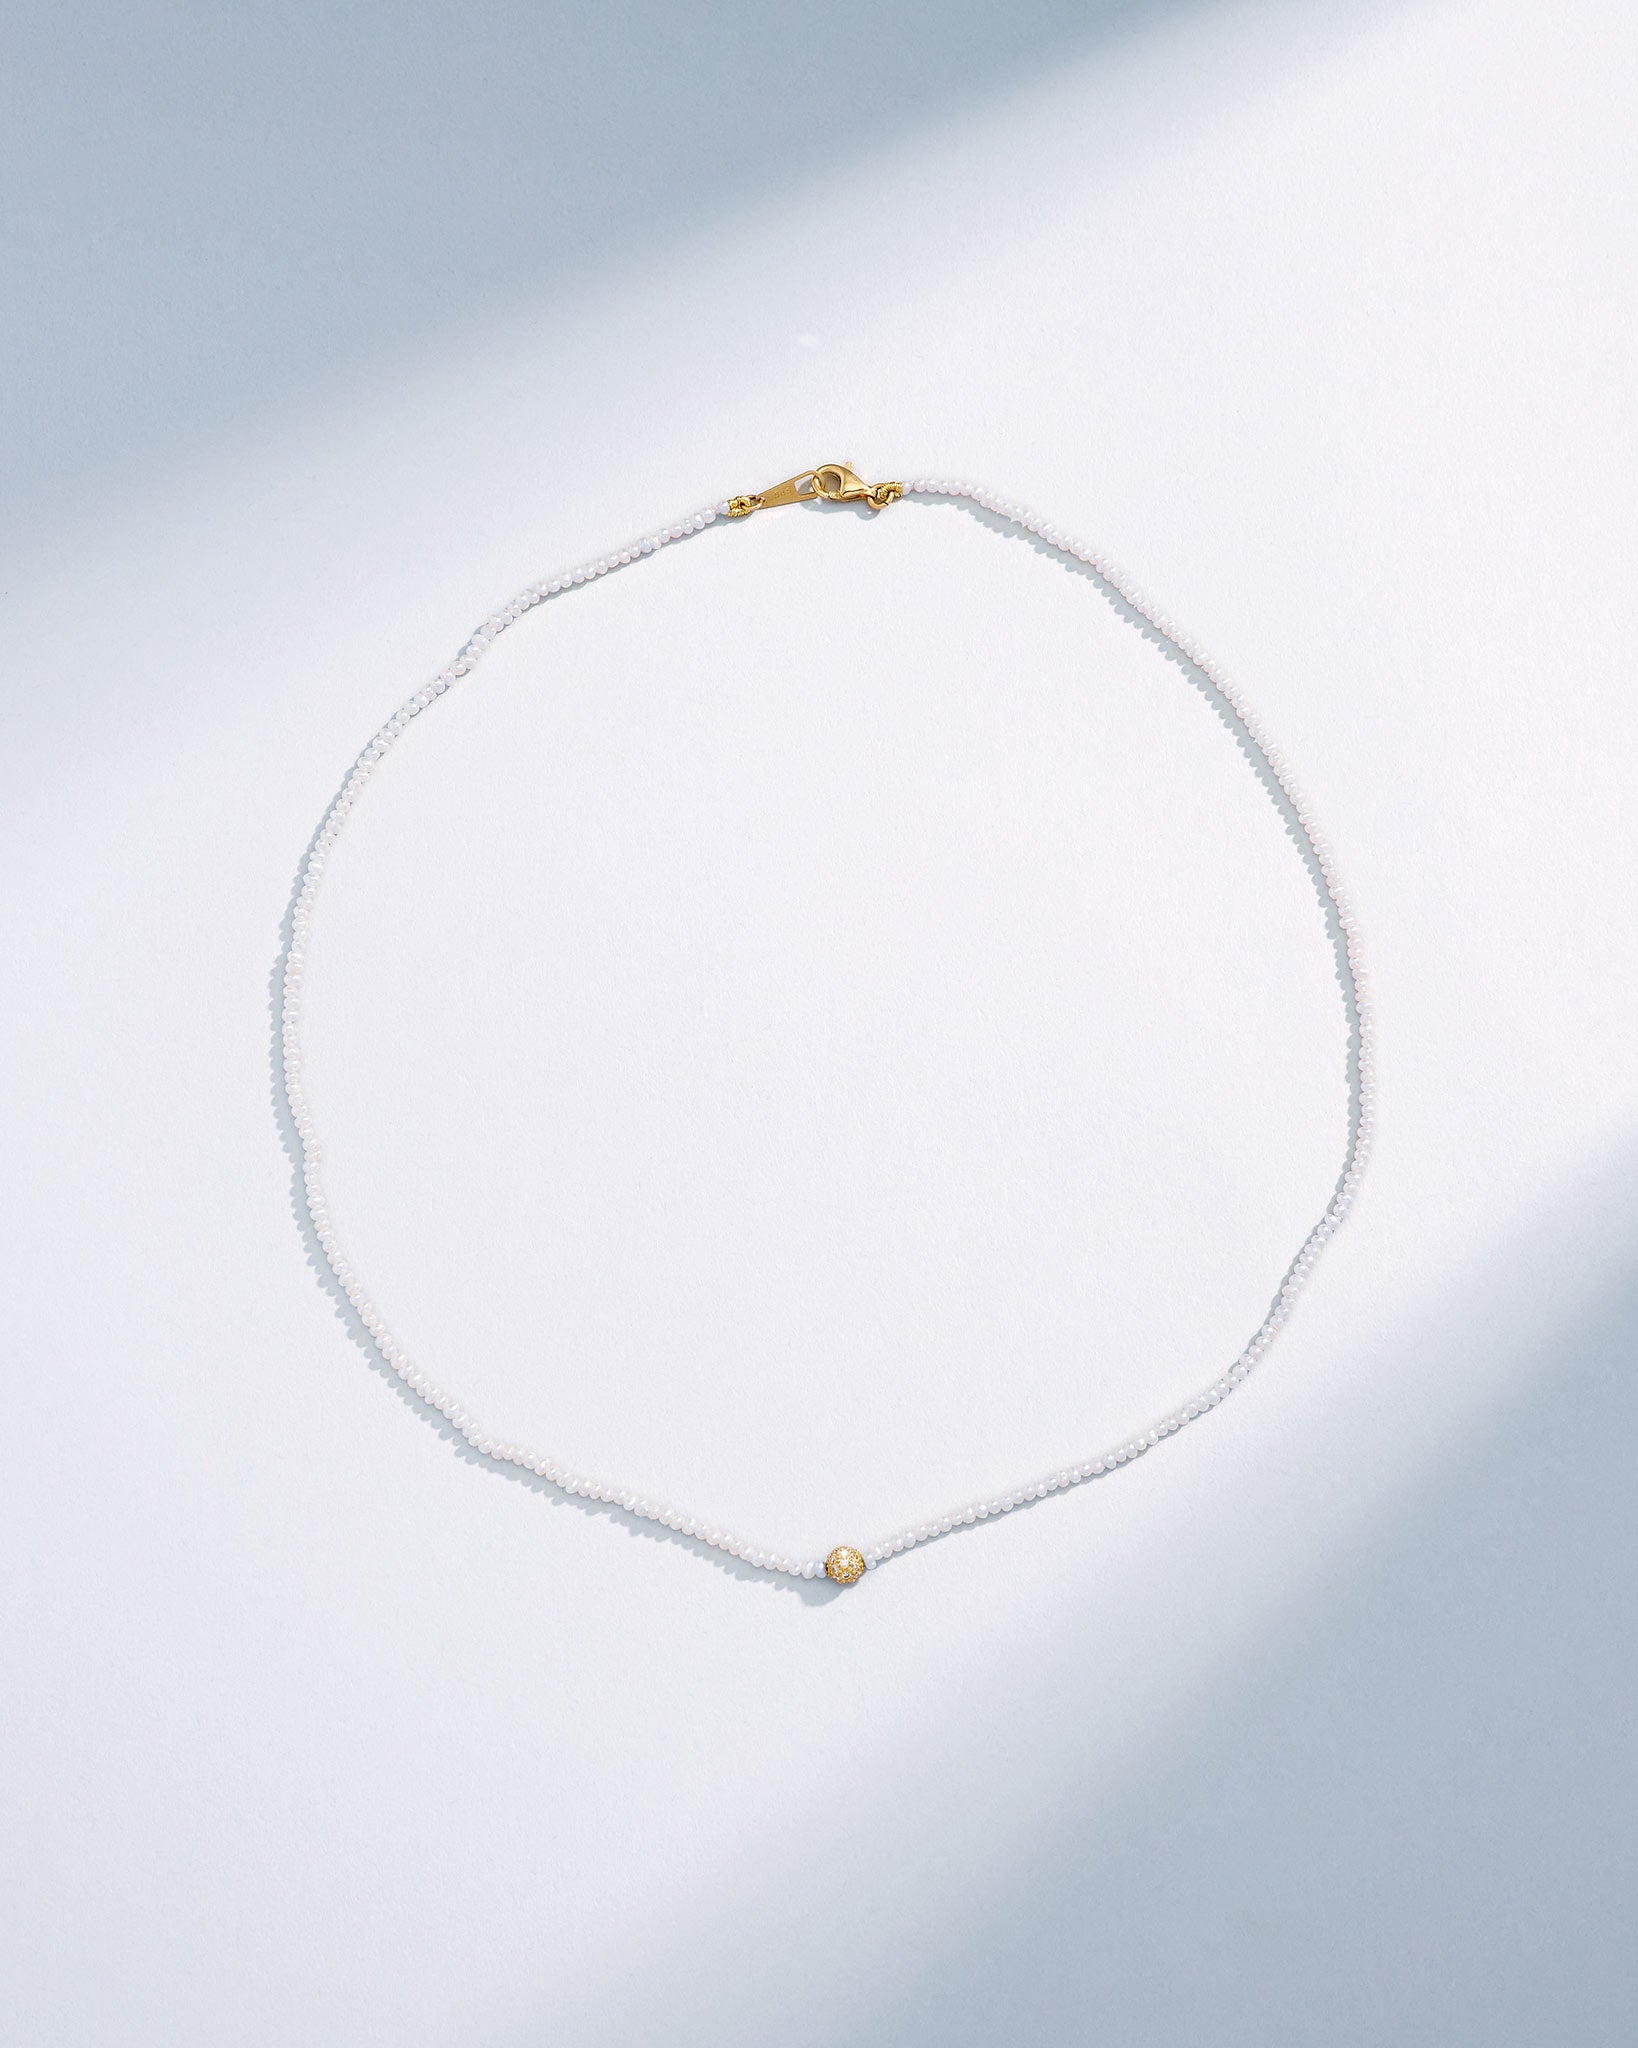 Suzanne Kalan Infinite Beaded White Pearl & Mini Pave Diamond Rondelle Necklace in 18k yellow gold